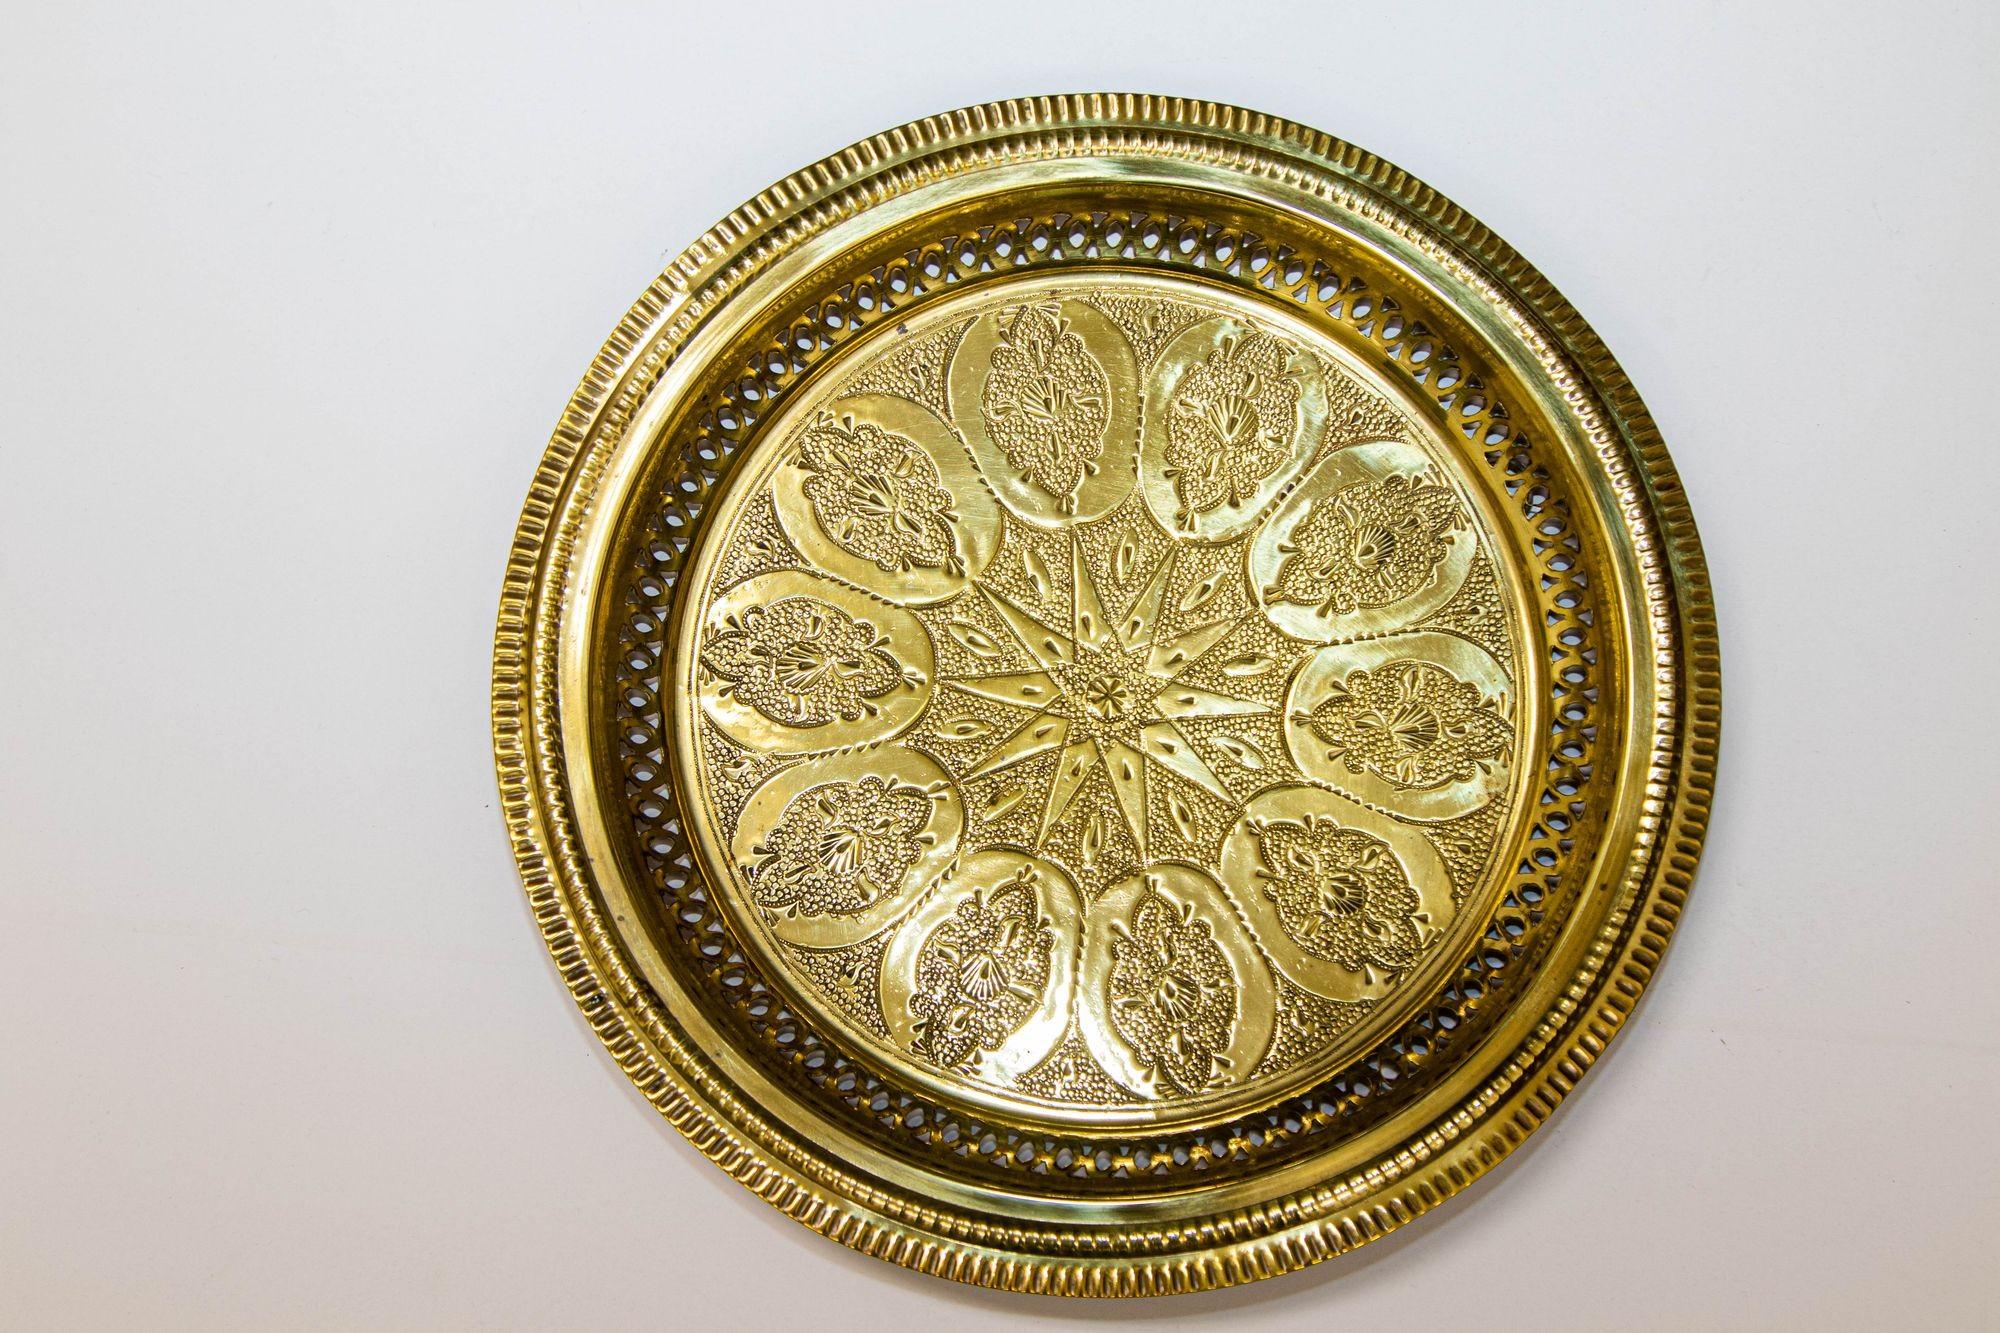 1940s Moroccan Brass Tray Polished Collectible Islamic Metalwork 13.5 in. D.
Beautiful Moroccan decorative tray.
Unique, one of a kind, very collectible.
Dimensions: 13.5 inches diameter.
Hand crafted in Fez, Morocco circa 1940's.
The Moroccan brass